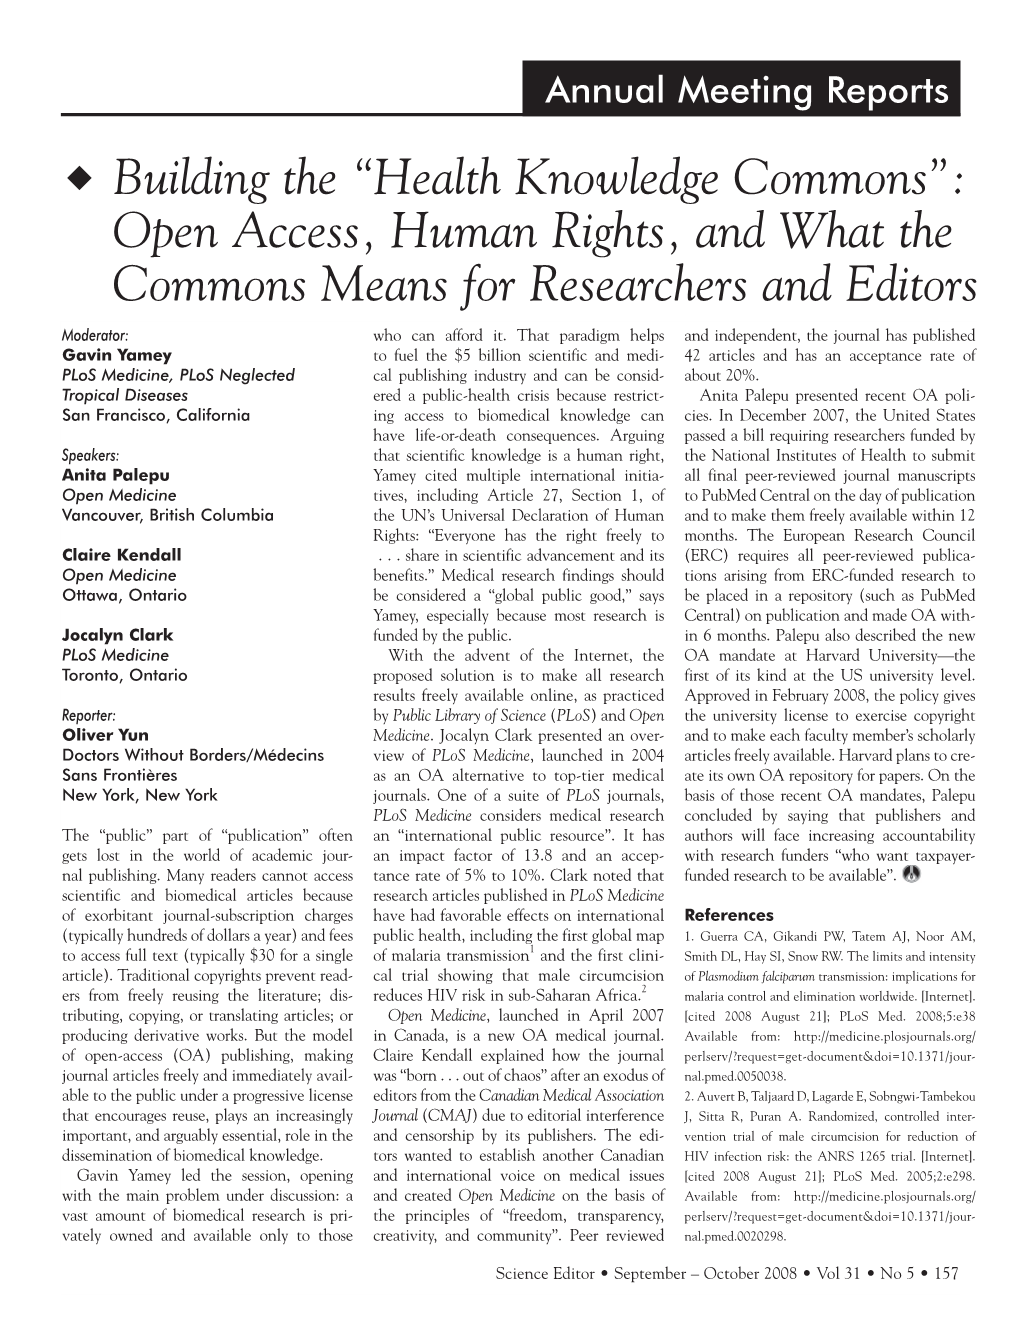 Health Knowledge Commons”: Open Access, Human Rights, and What the Commons Means for Researchers and Editors